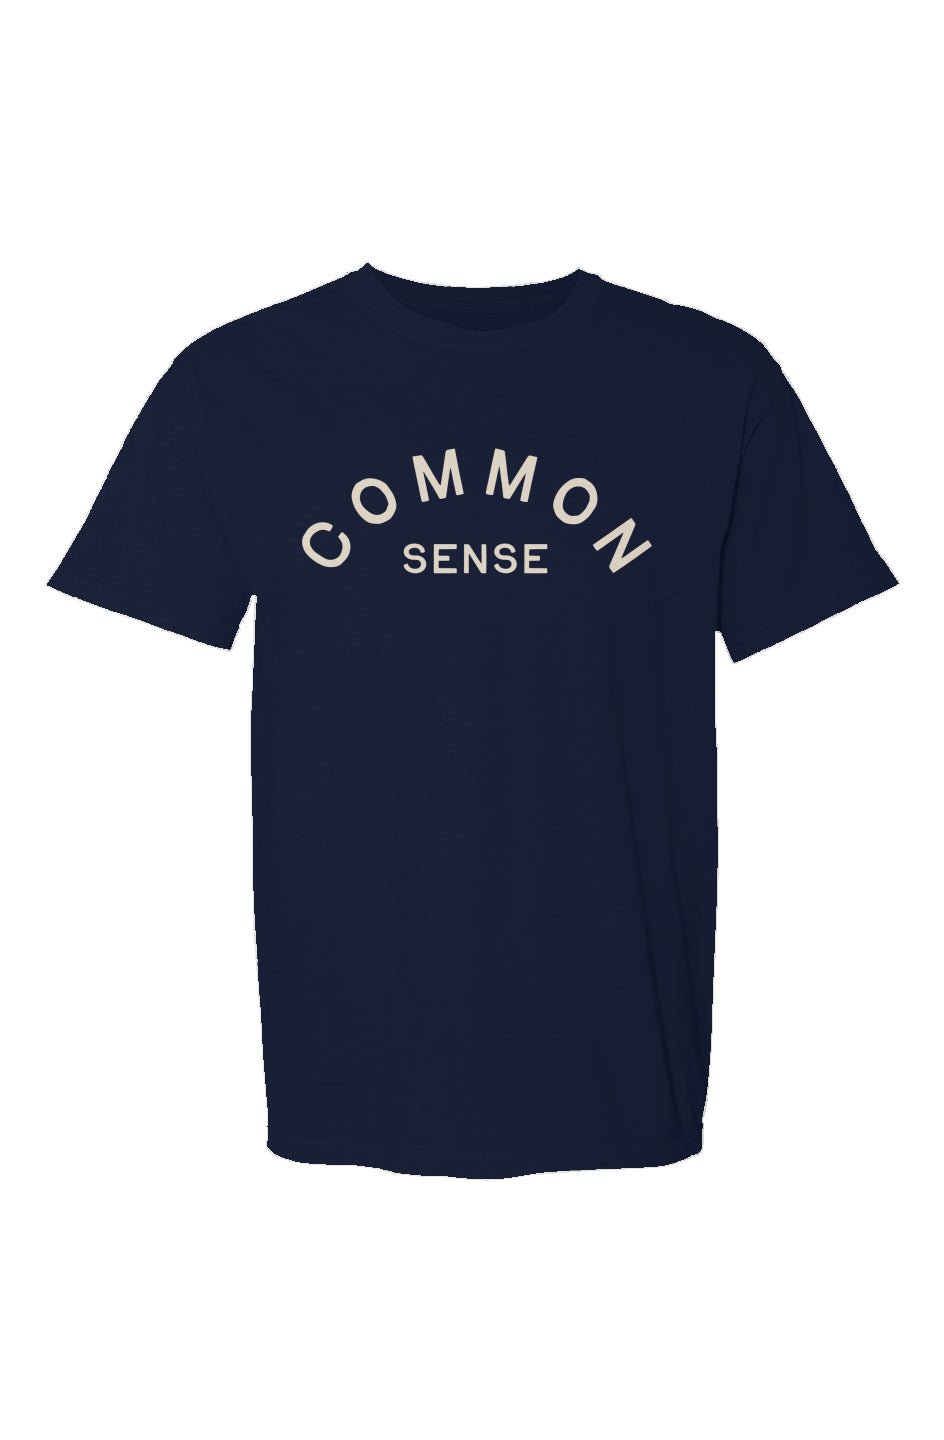 Made in USA - Commonsense Tee